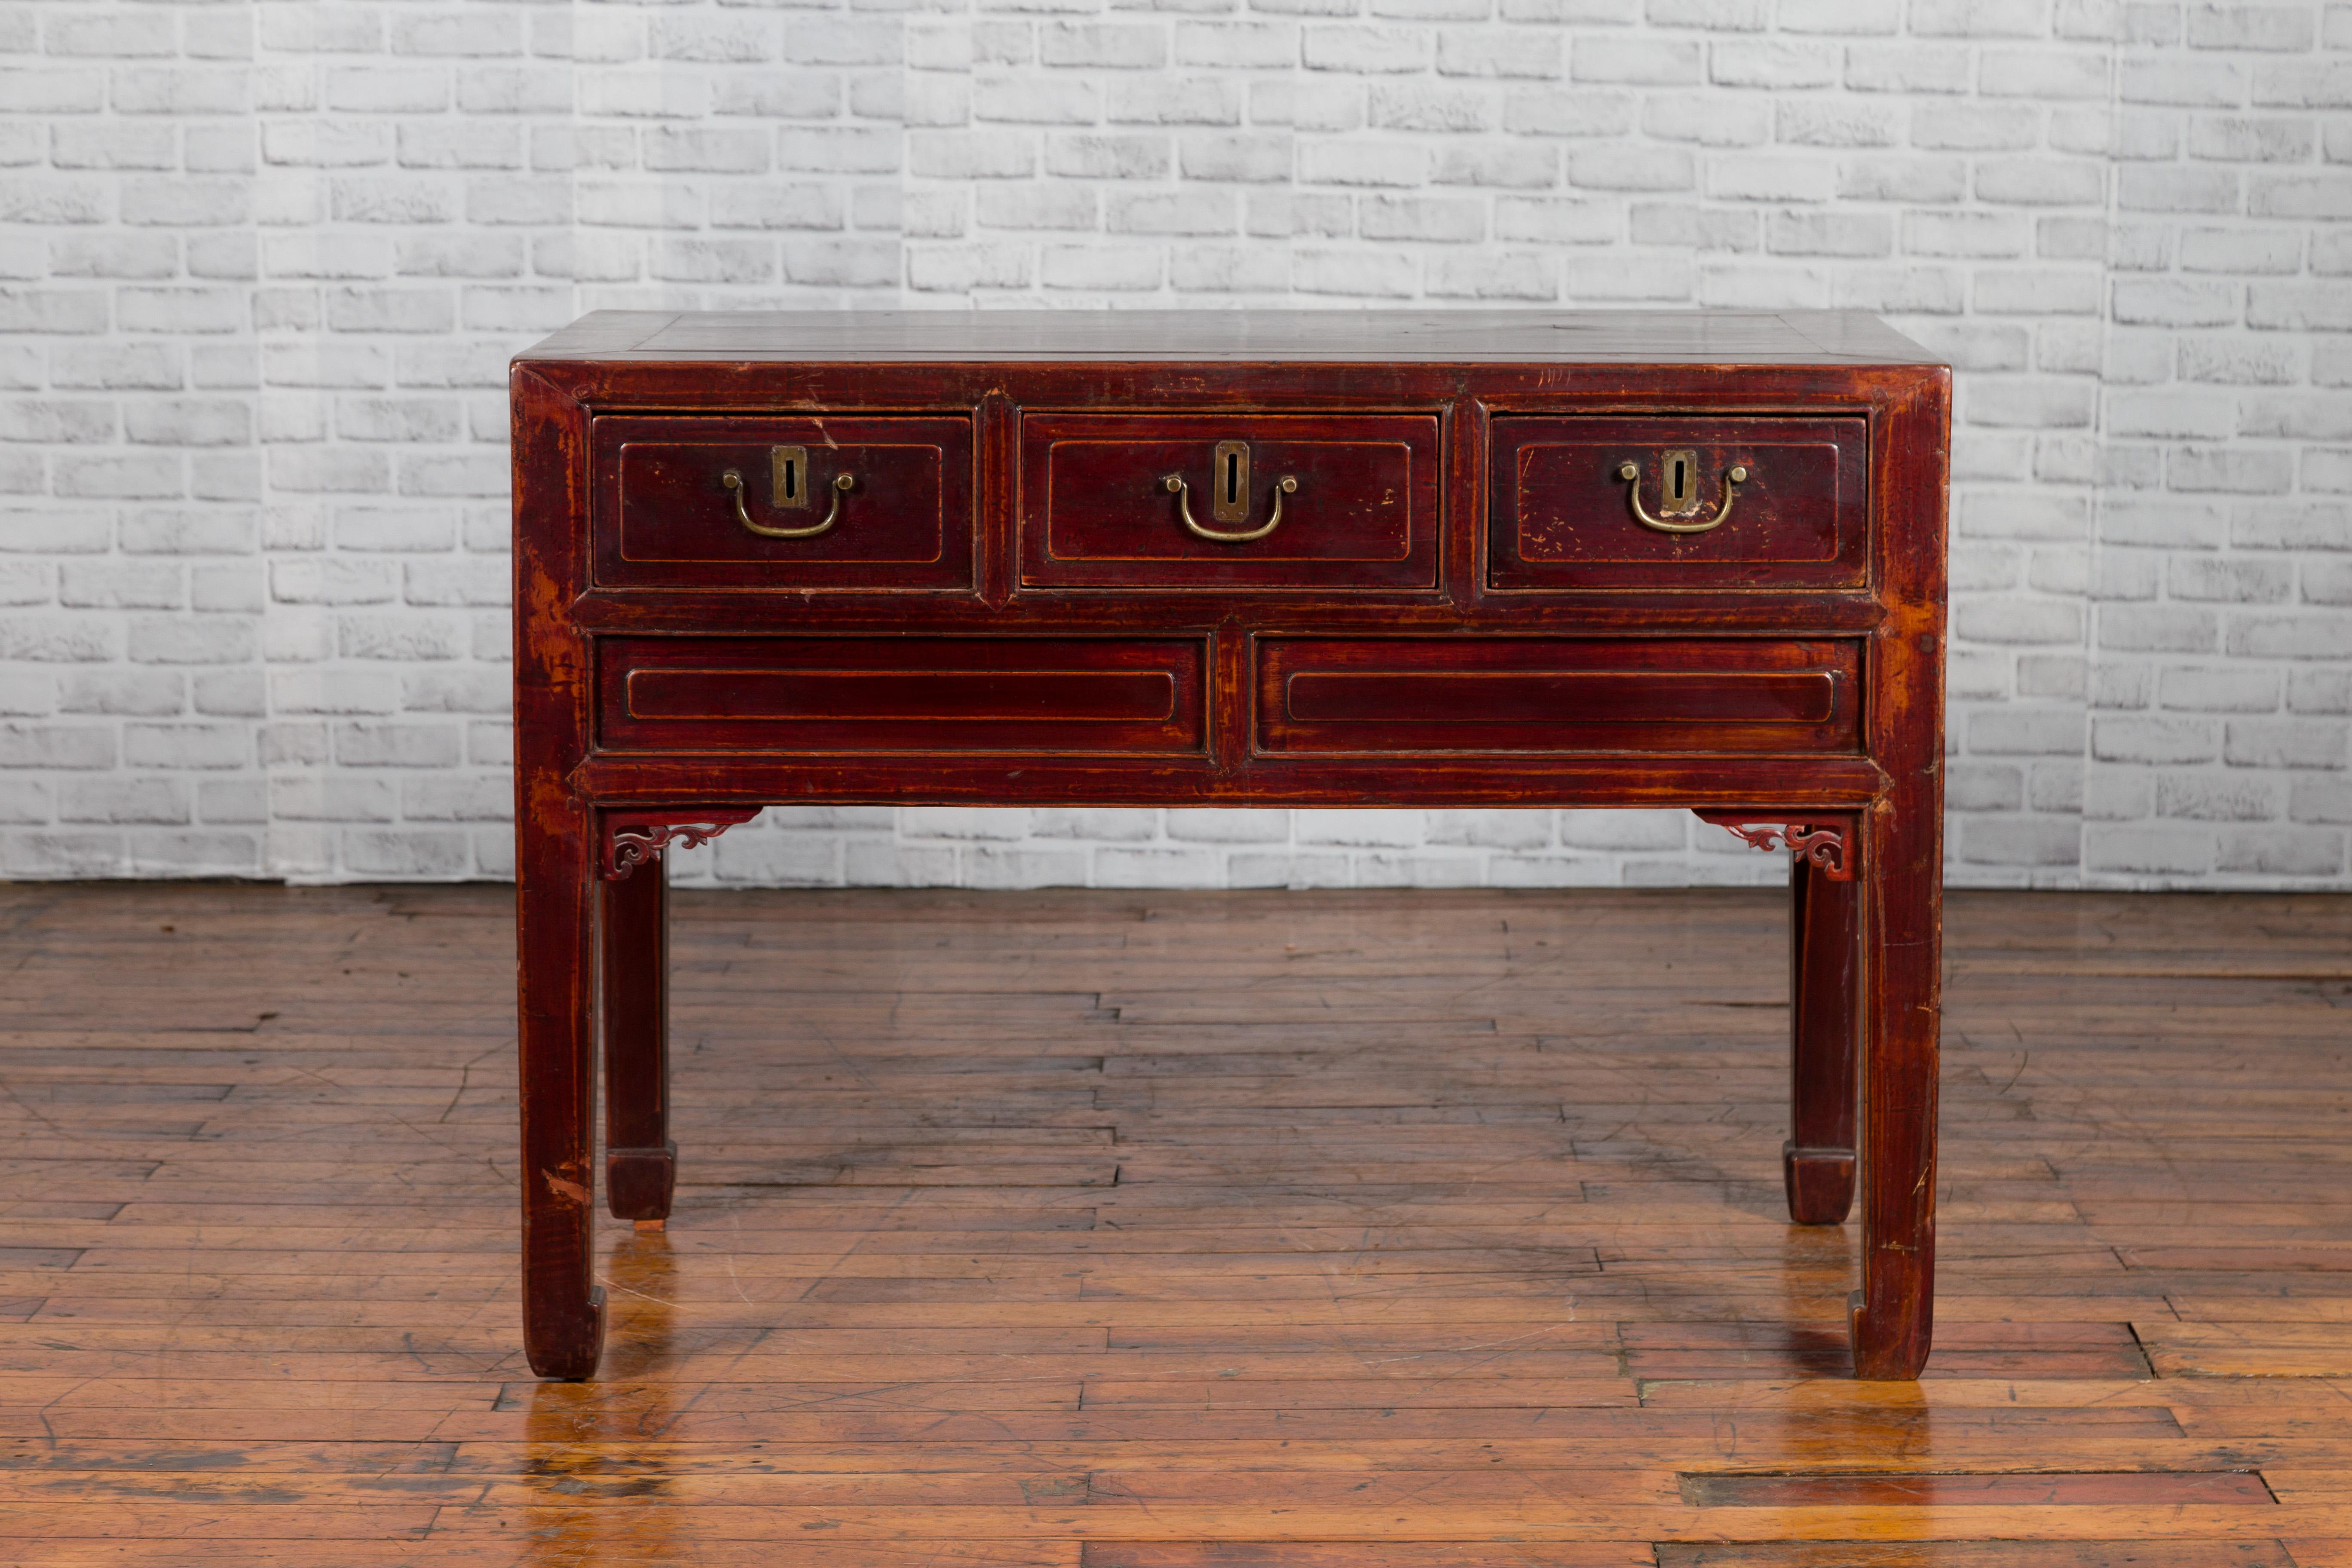 A Chinese antique console table from the early 20th century, with three drawers and carved spandrels. Crafted in China, this 100 years old console table features a rectangular top with central board, sitting above three drawers fitted with brass